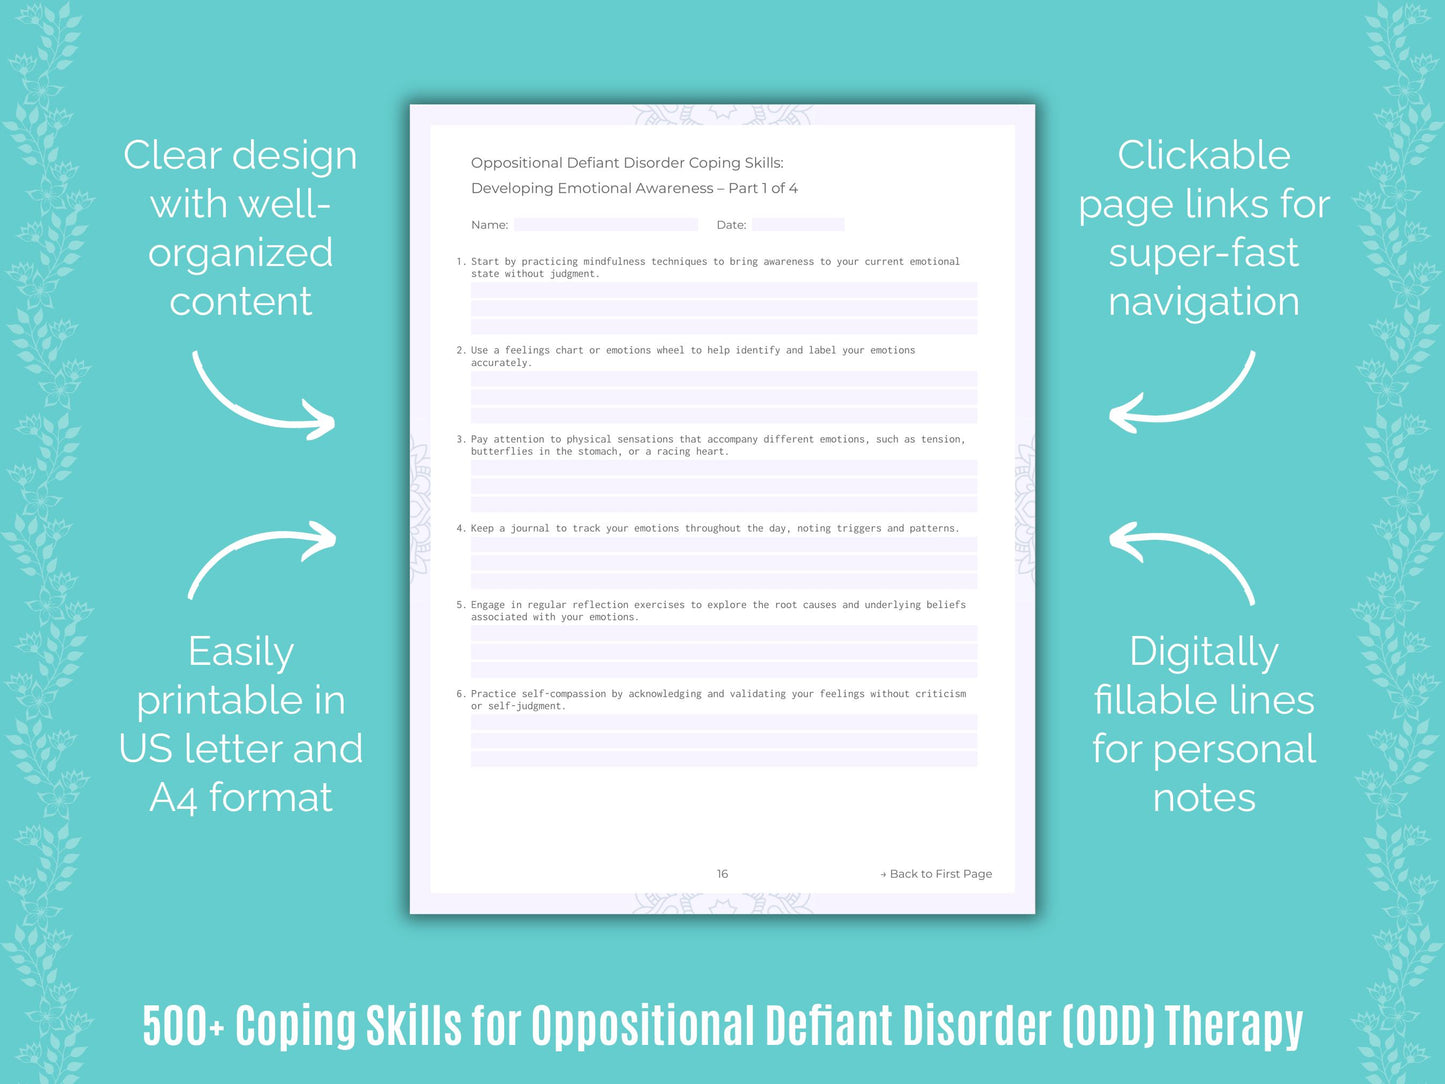 Oppositional Defiant Disorder (ODD) Therapy Resource